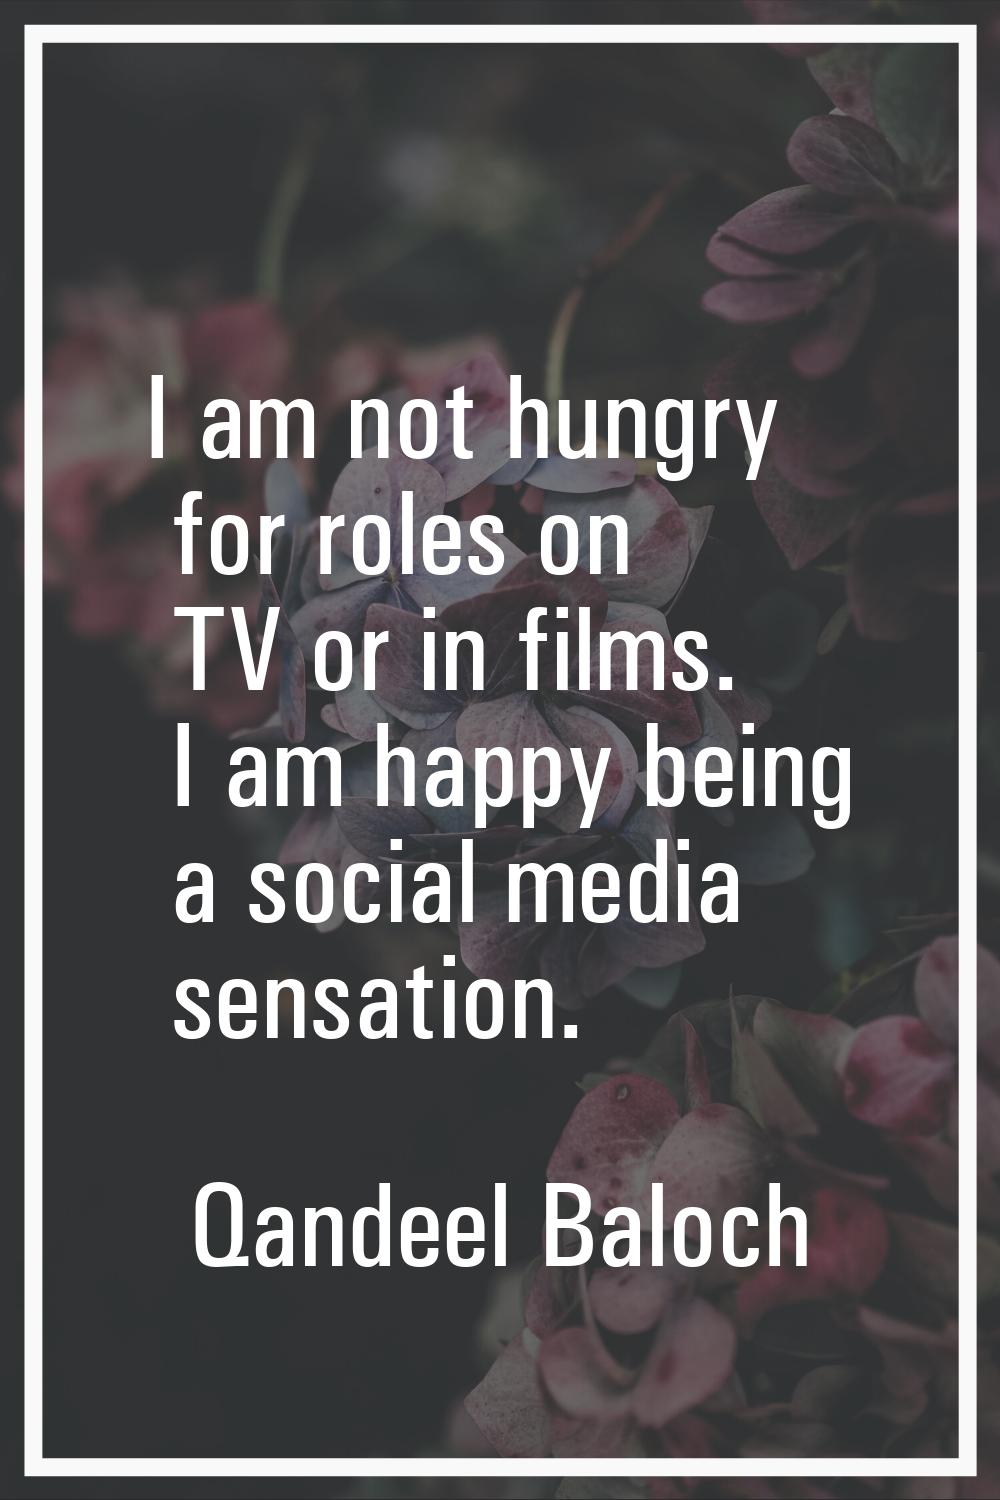 I am not hungry for roles on TV or in films. I am happy being a social media sensation.